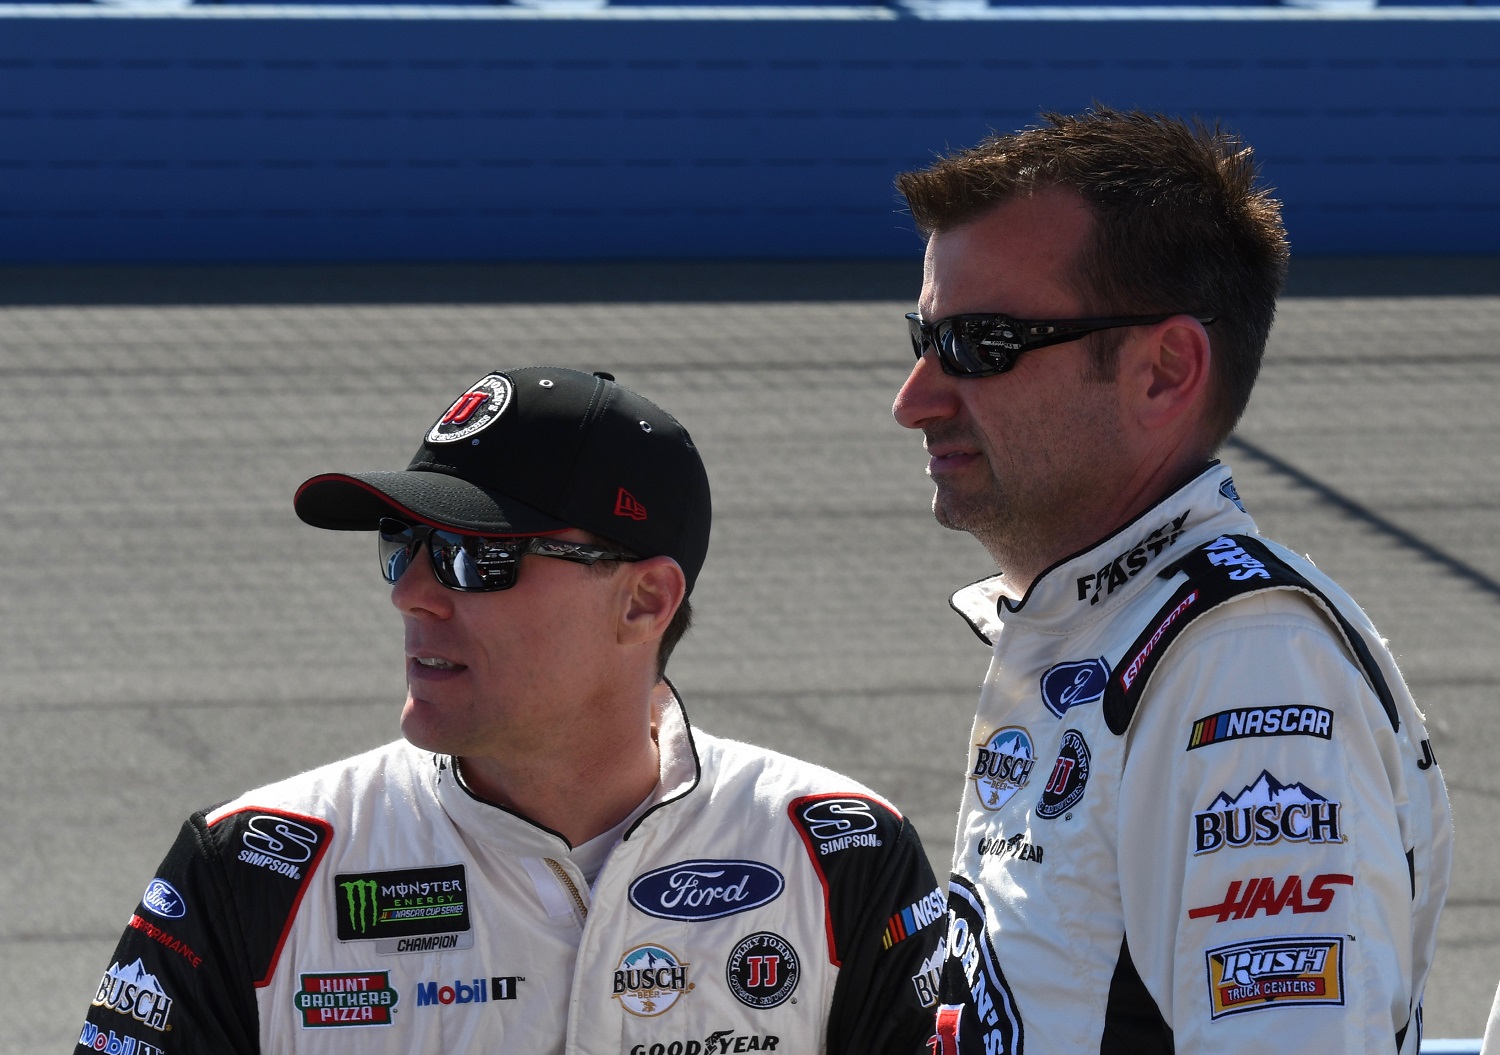 Kevin Harvick and crew chief Rodney Childers on pit lane prior to the Auto Club 400 on March 17, 2019. | Lyle Setter/Icon Sportswire via Getty Images.